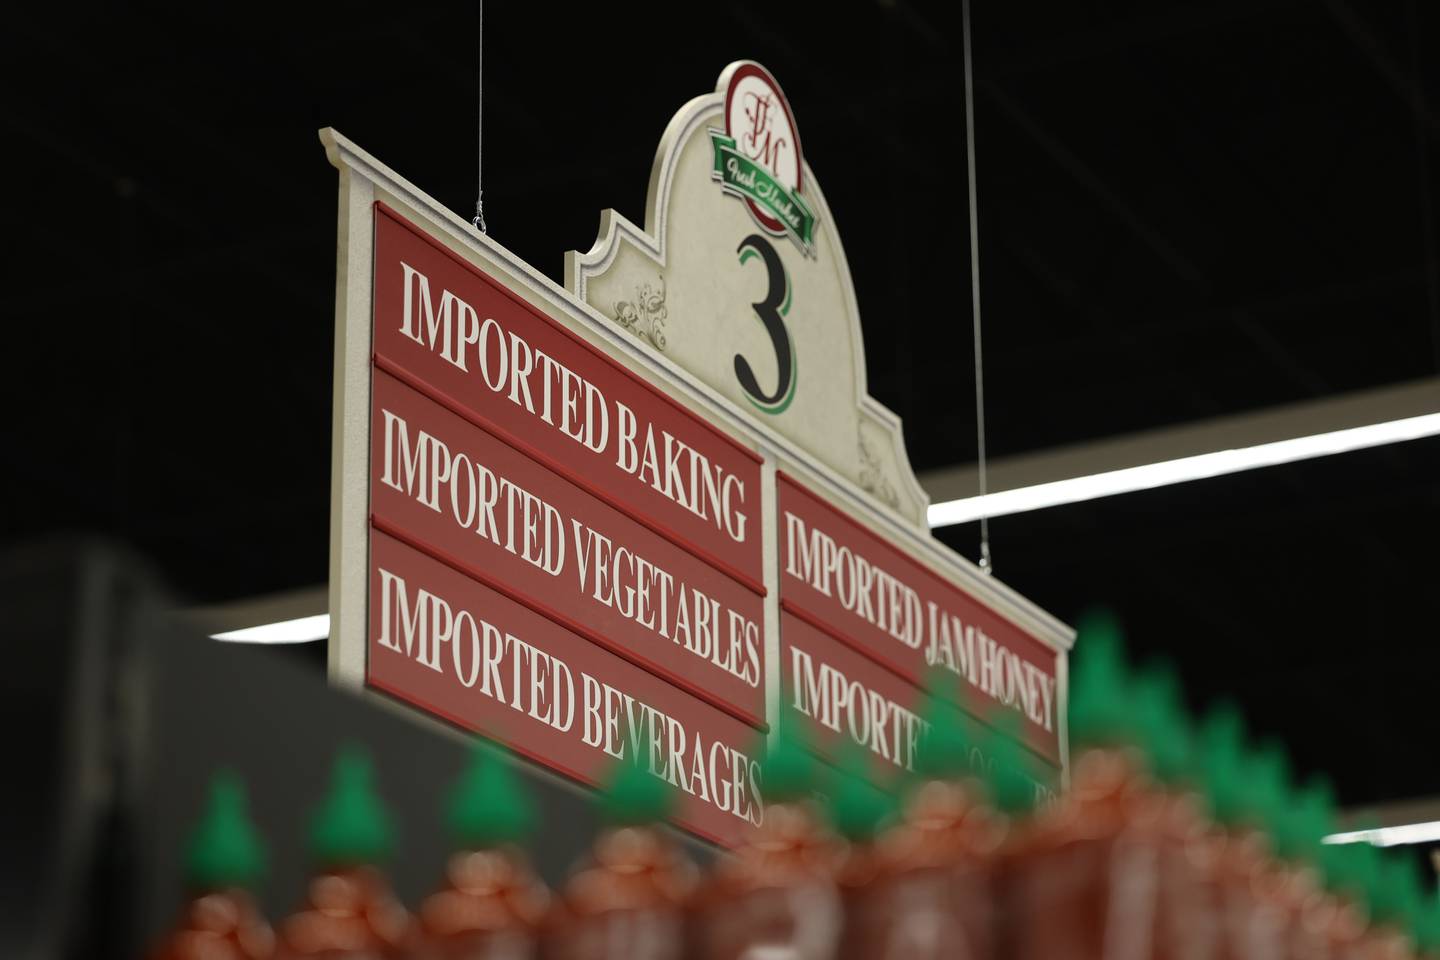 Tony’s Fresh Market features multiple aisles of imported produce. Wednesday, June 28, 2022 in Joliet.